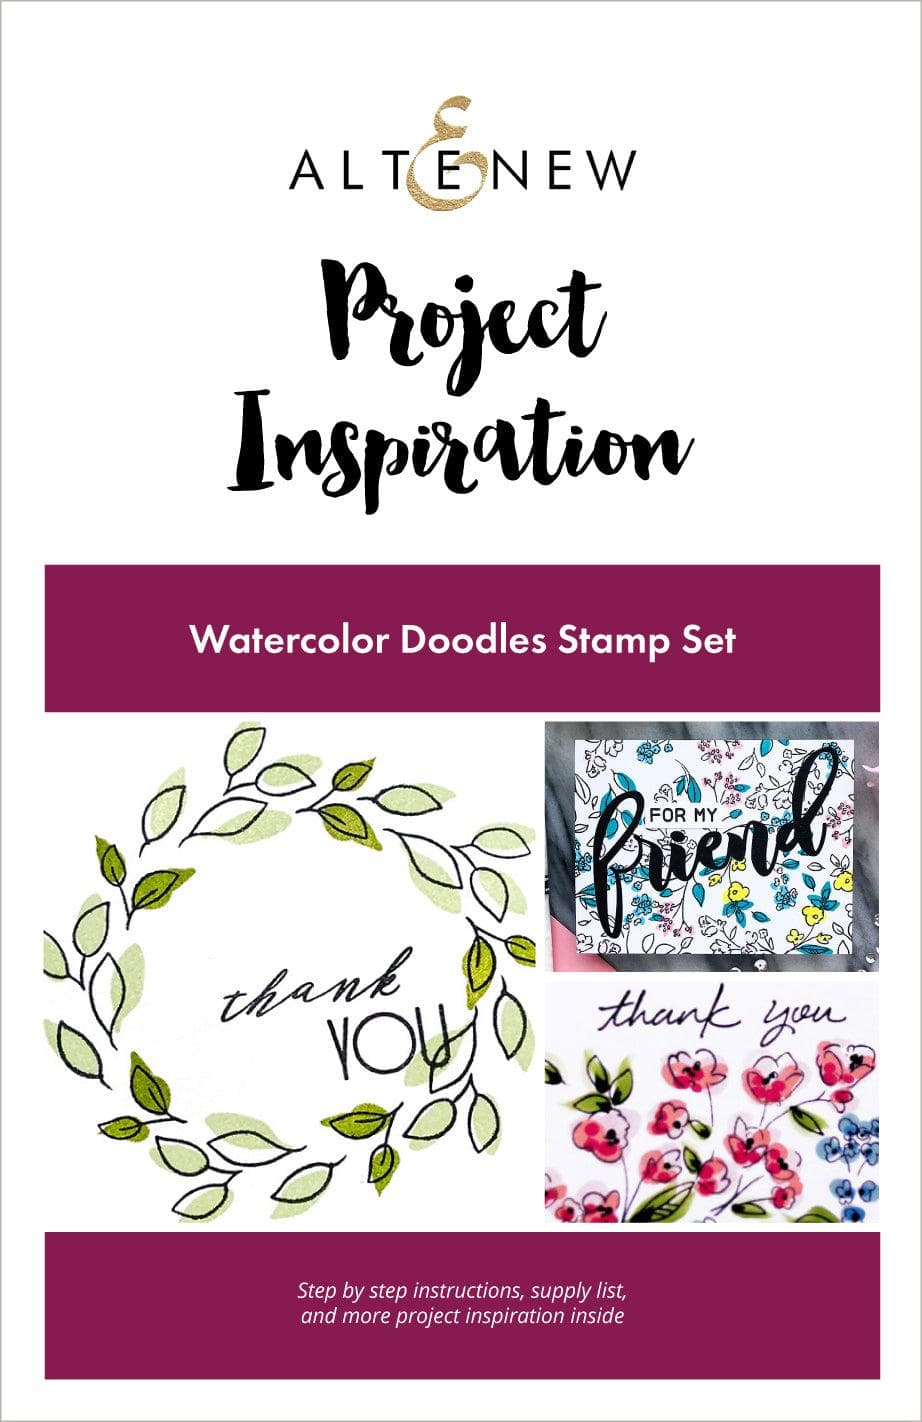 55Printing.com Printed Media Watercolor Doodles Project Inspiration Guide